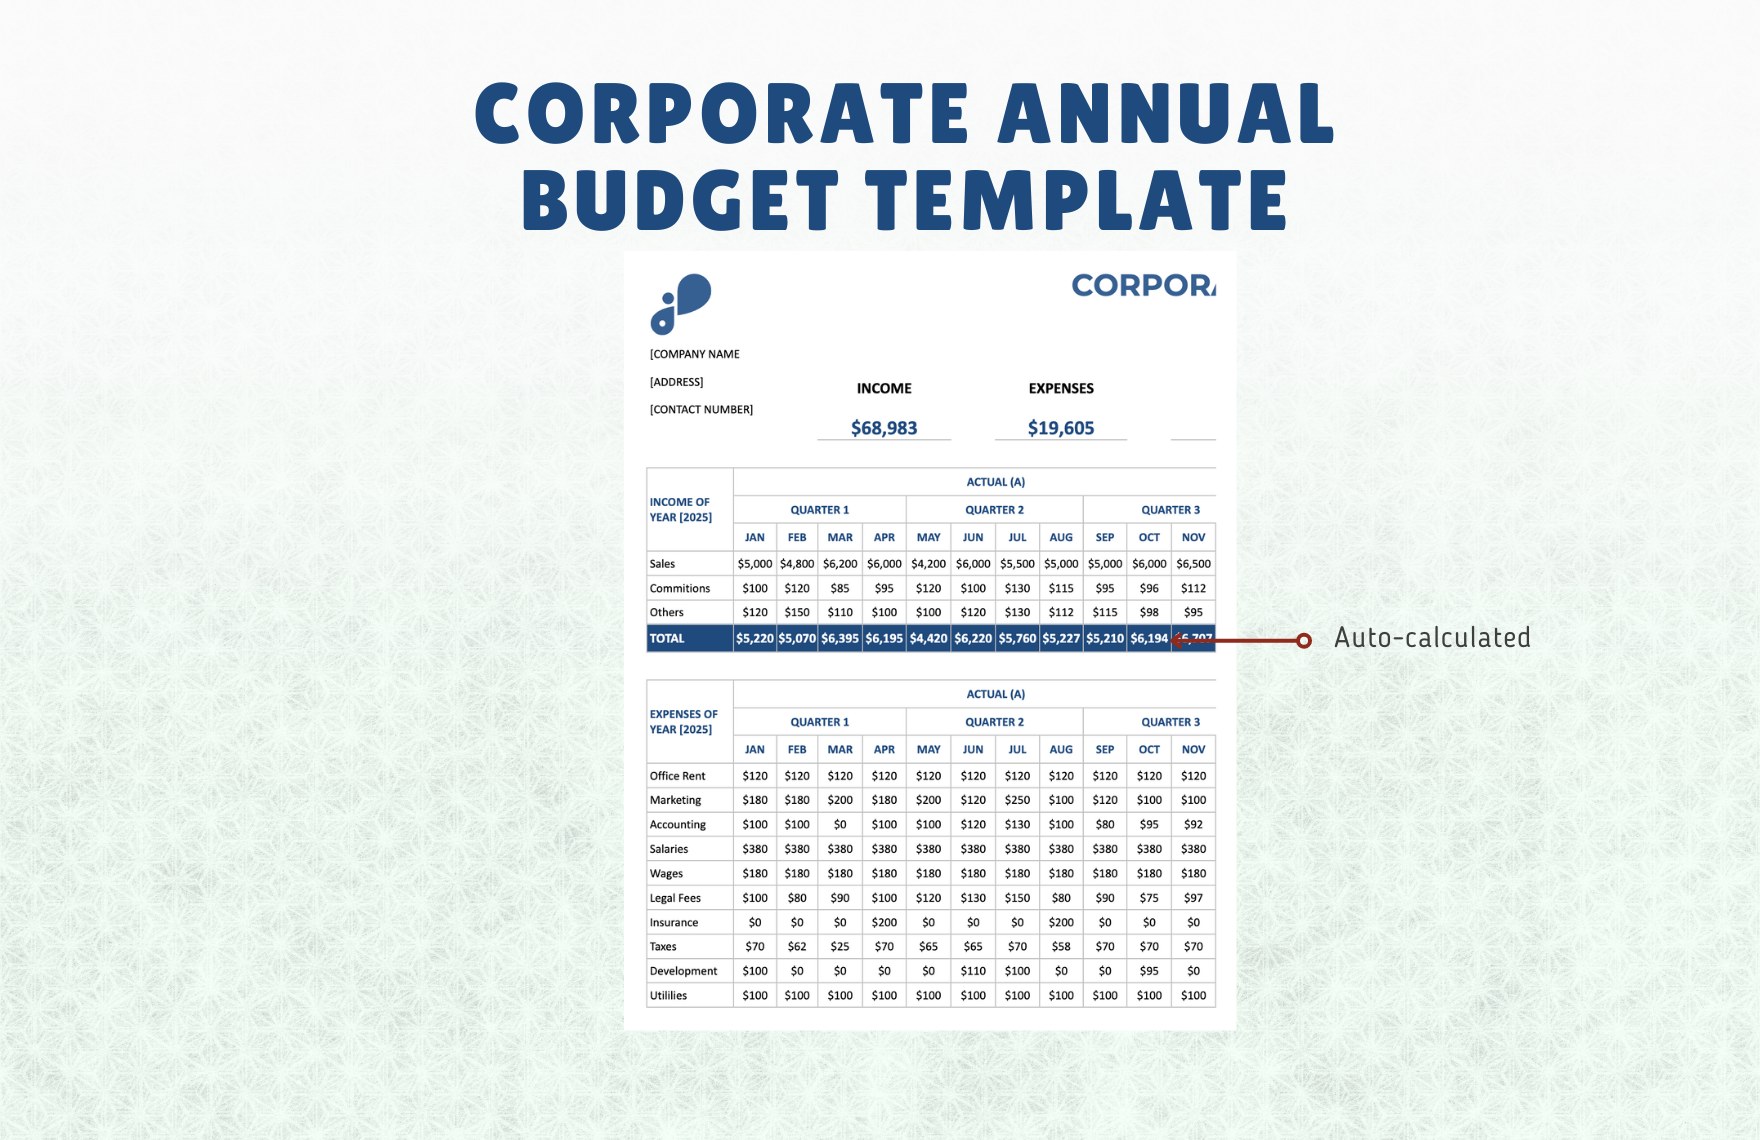 Corporate Annual Budget Template